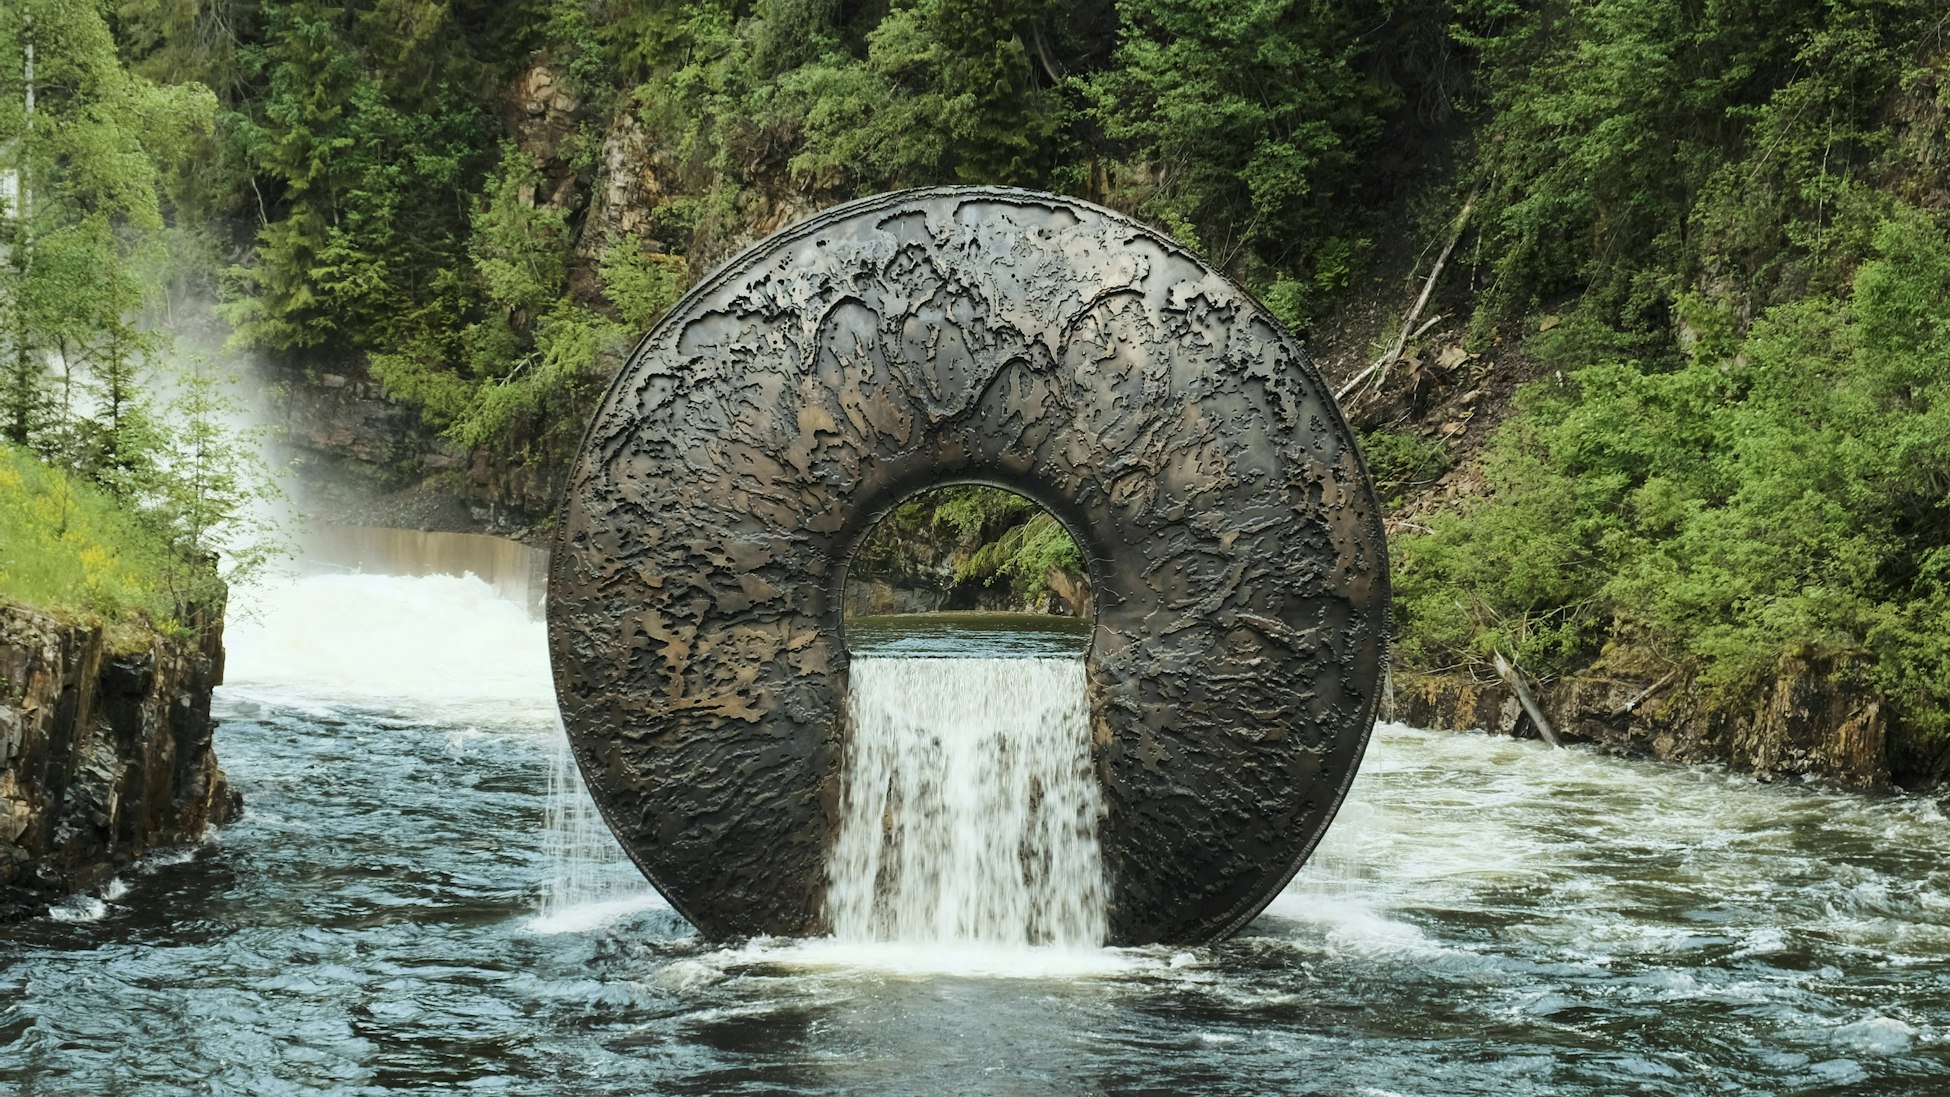 Sculpture, shape of an eye, placed in the river